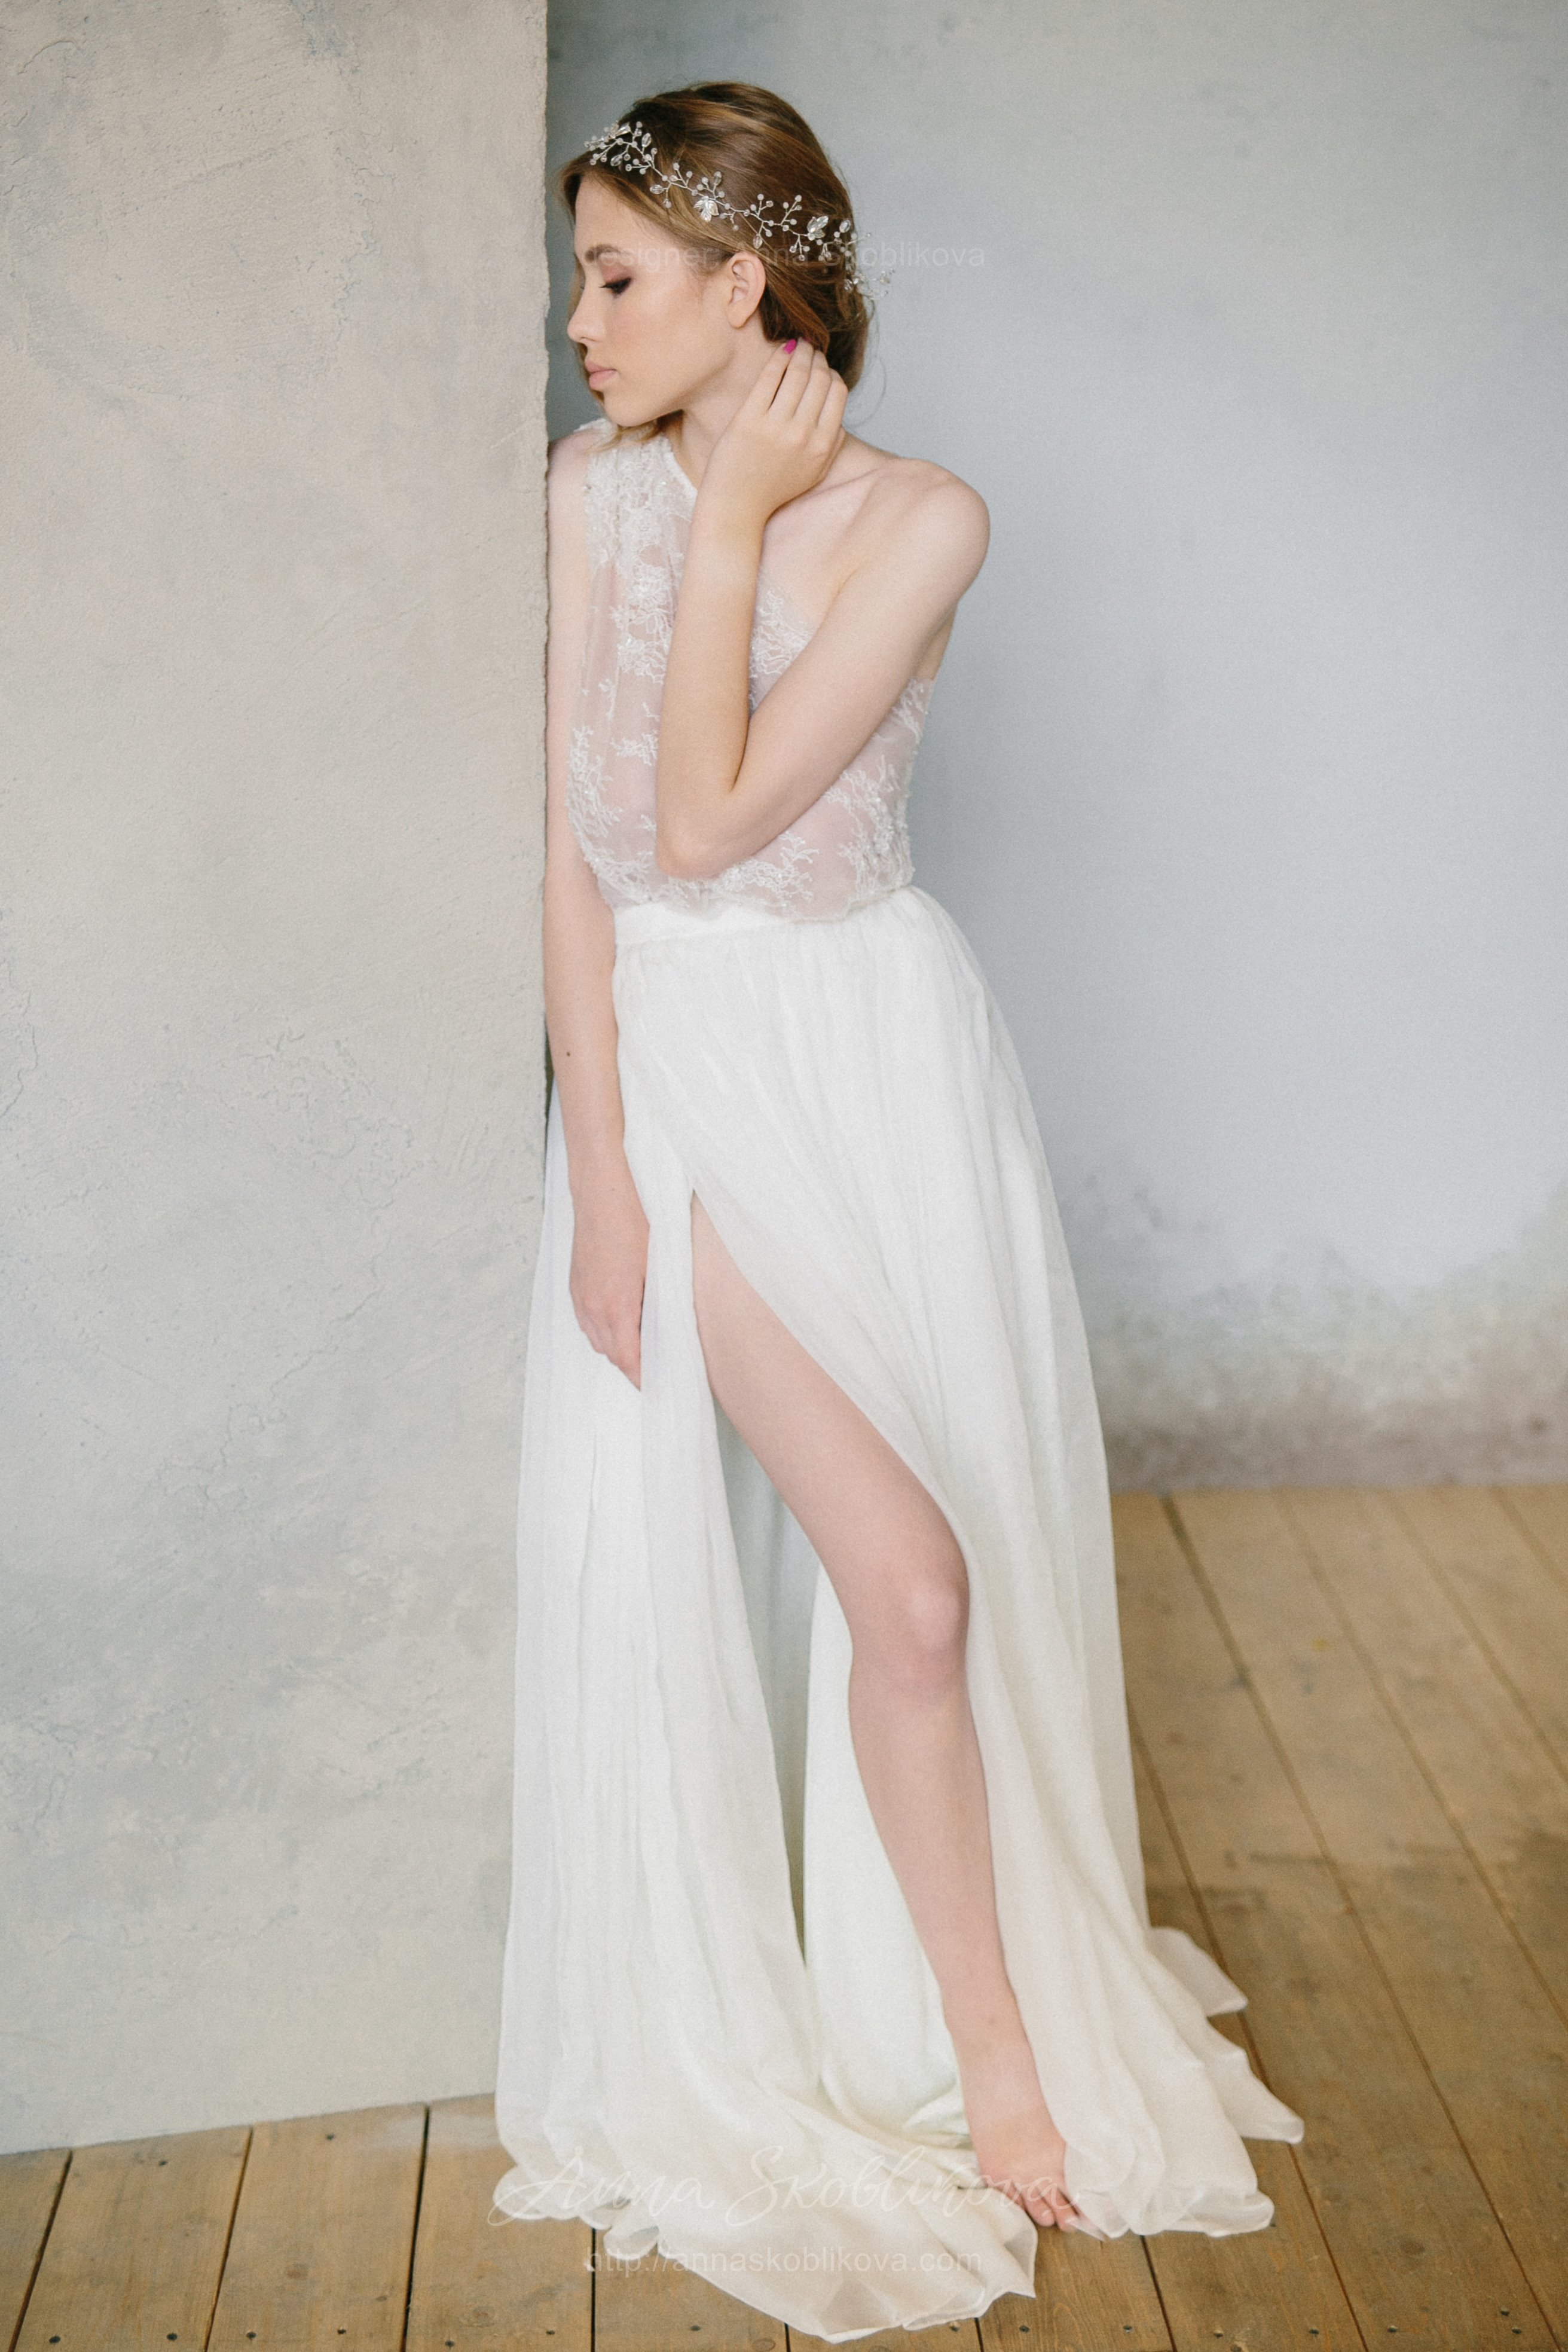 Two Piece Wedding Dress From Top And Wrap Skirt Wedding Dresses And Evening Gowns By Anna Skoblikova